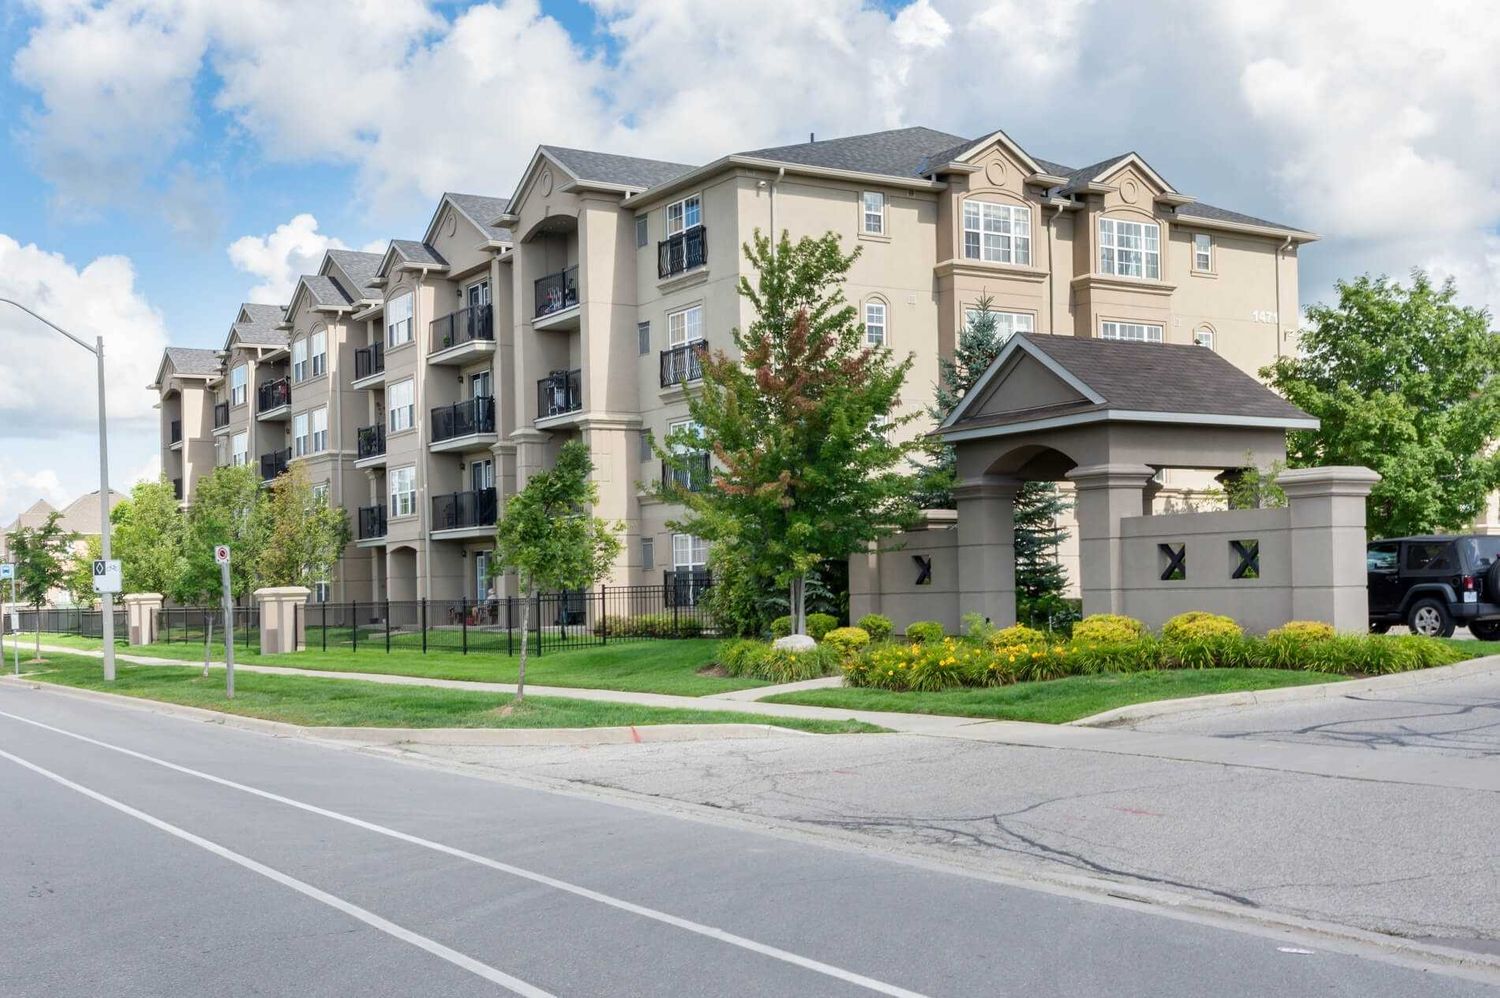 1471-1491 Maple Ave. This condo at Maple Crossing Condos is located in  Milton, Toronto - image #1 of 3 by Strata.ca